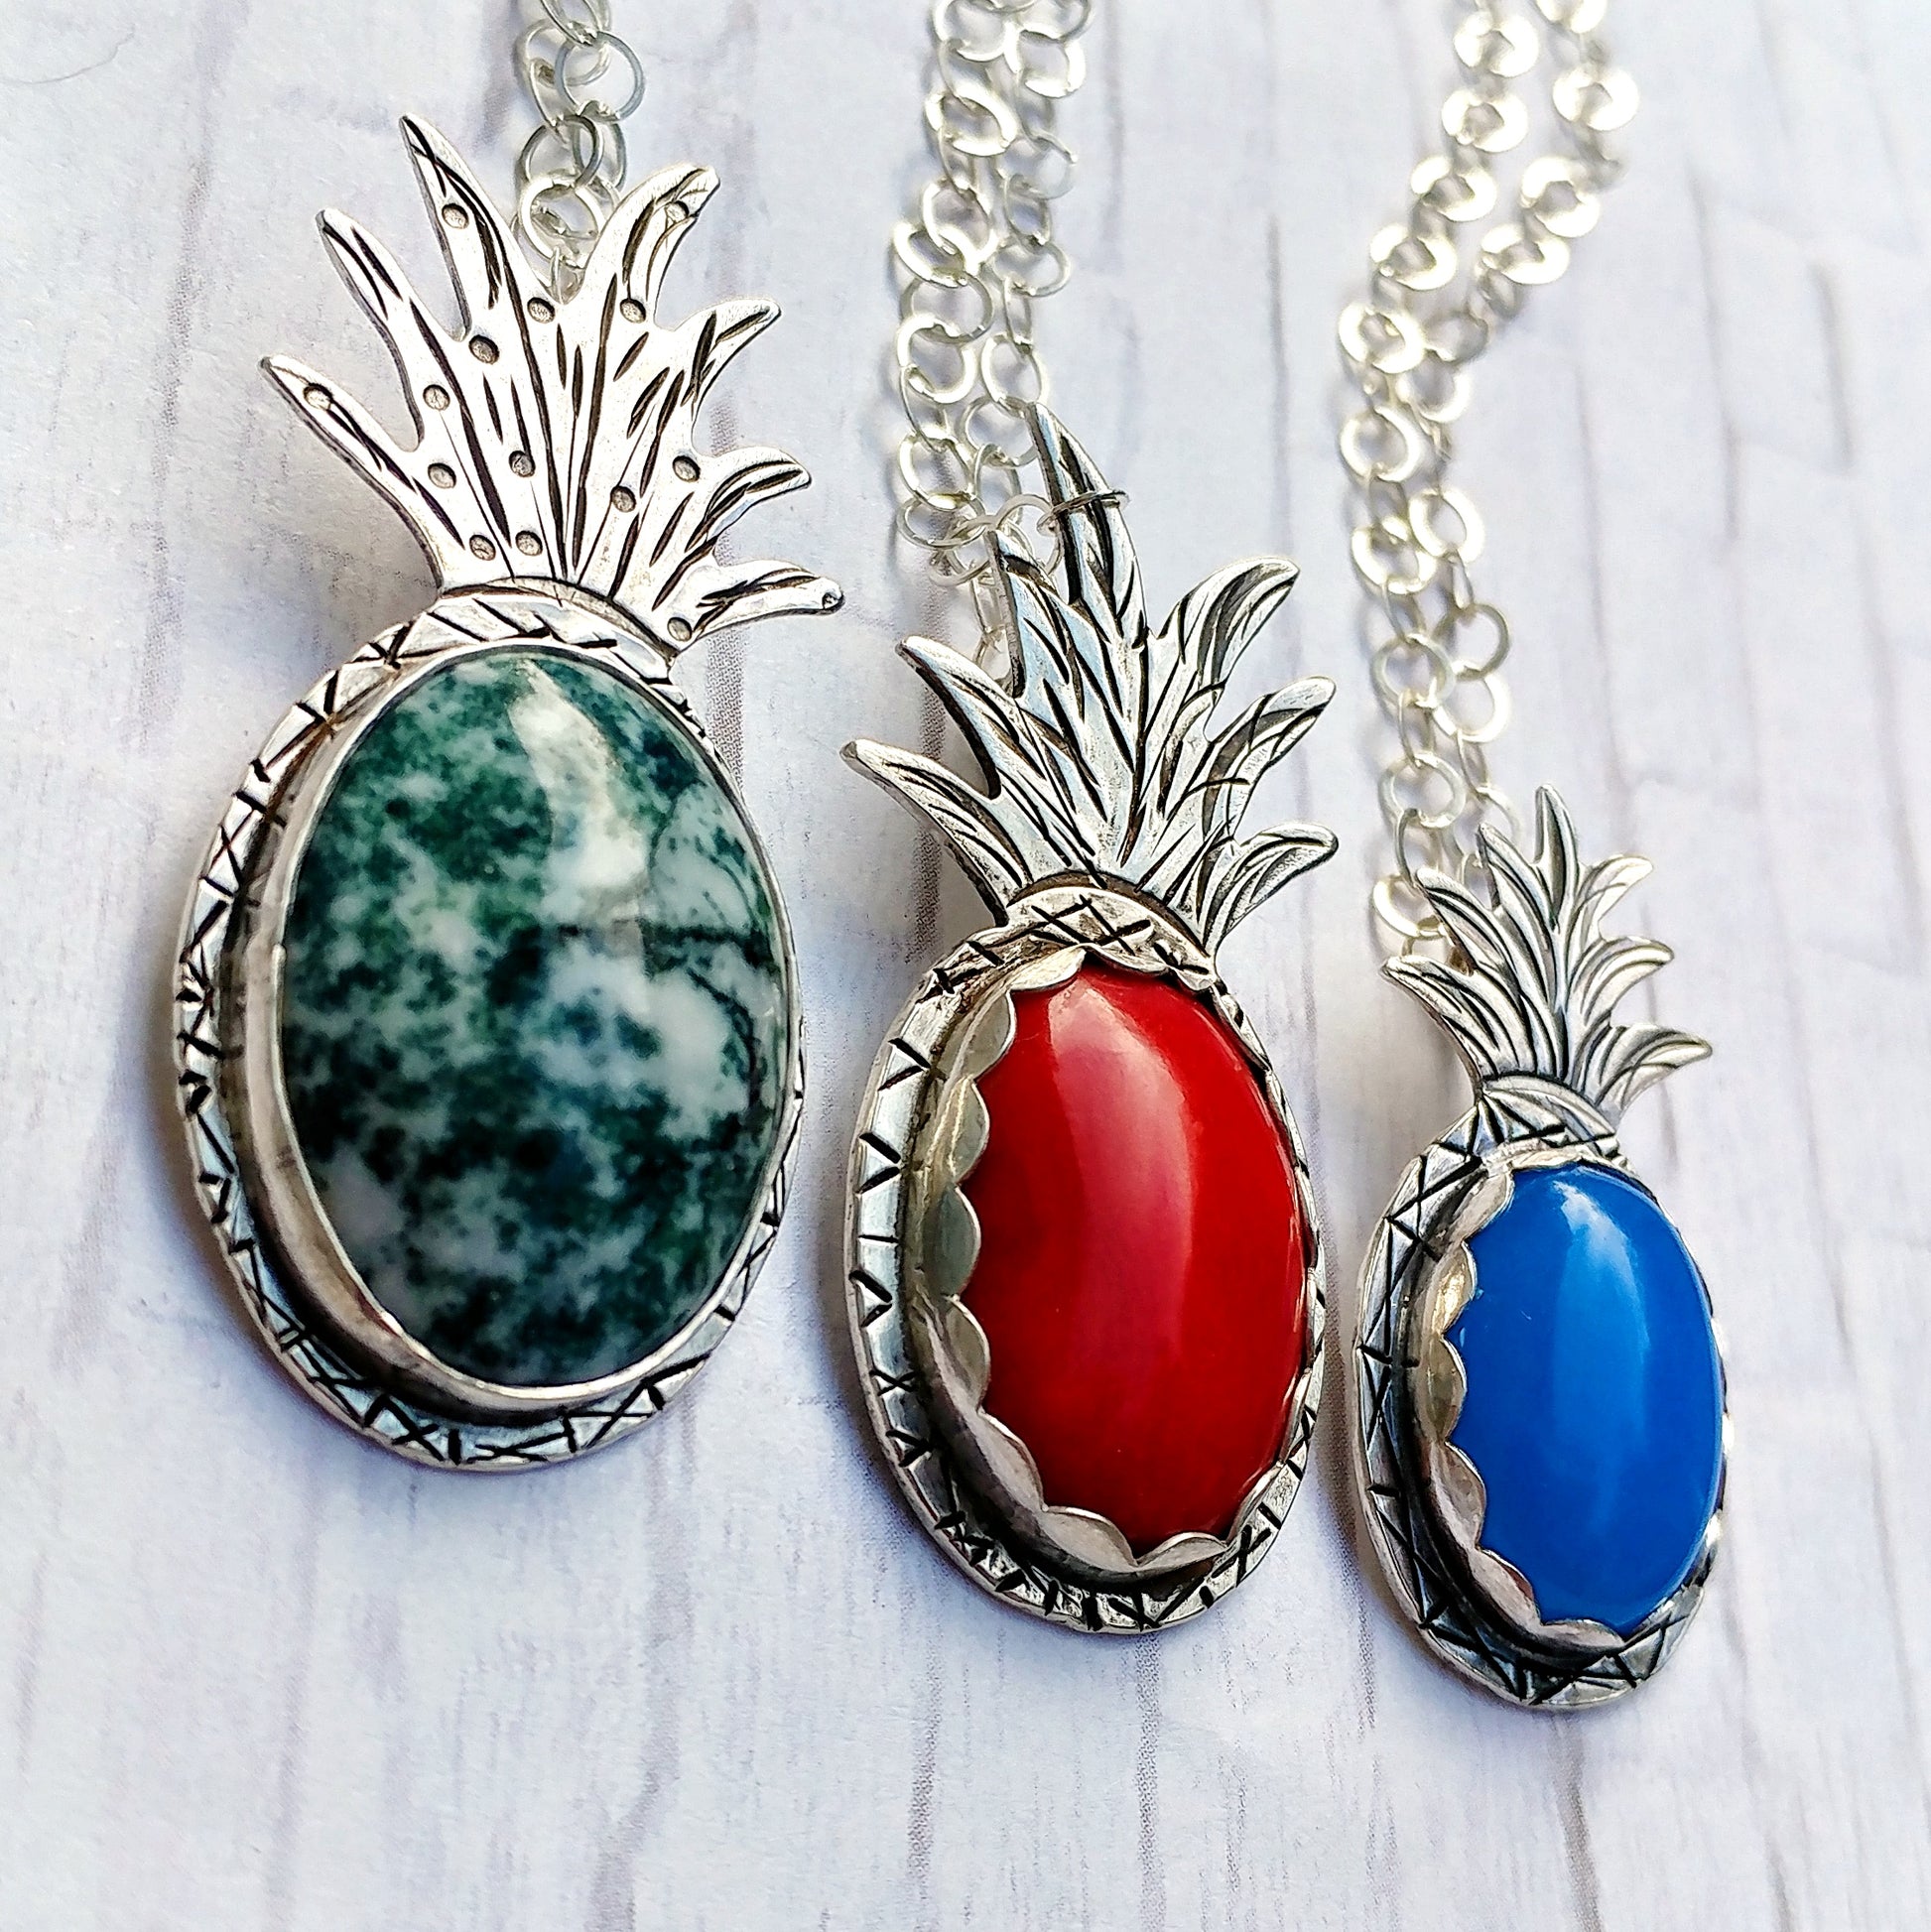 Trio of various gemstones set into a handmade sterling silver pineapple necklace